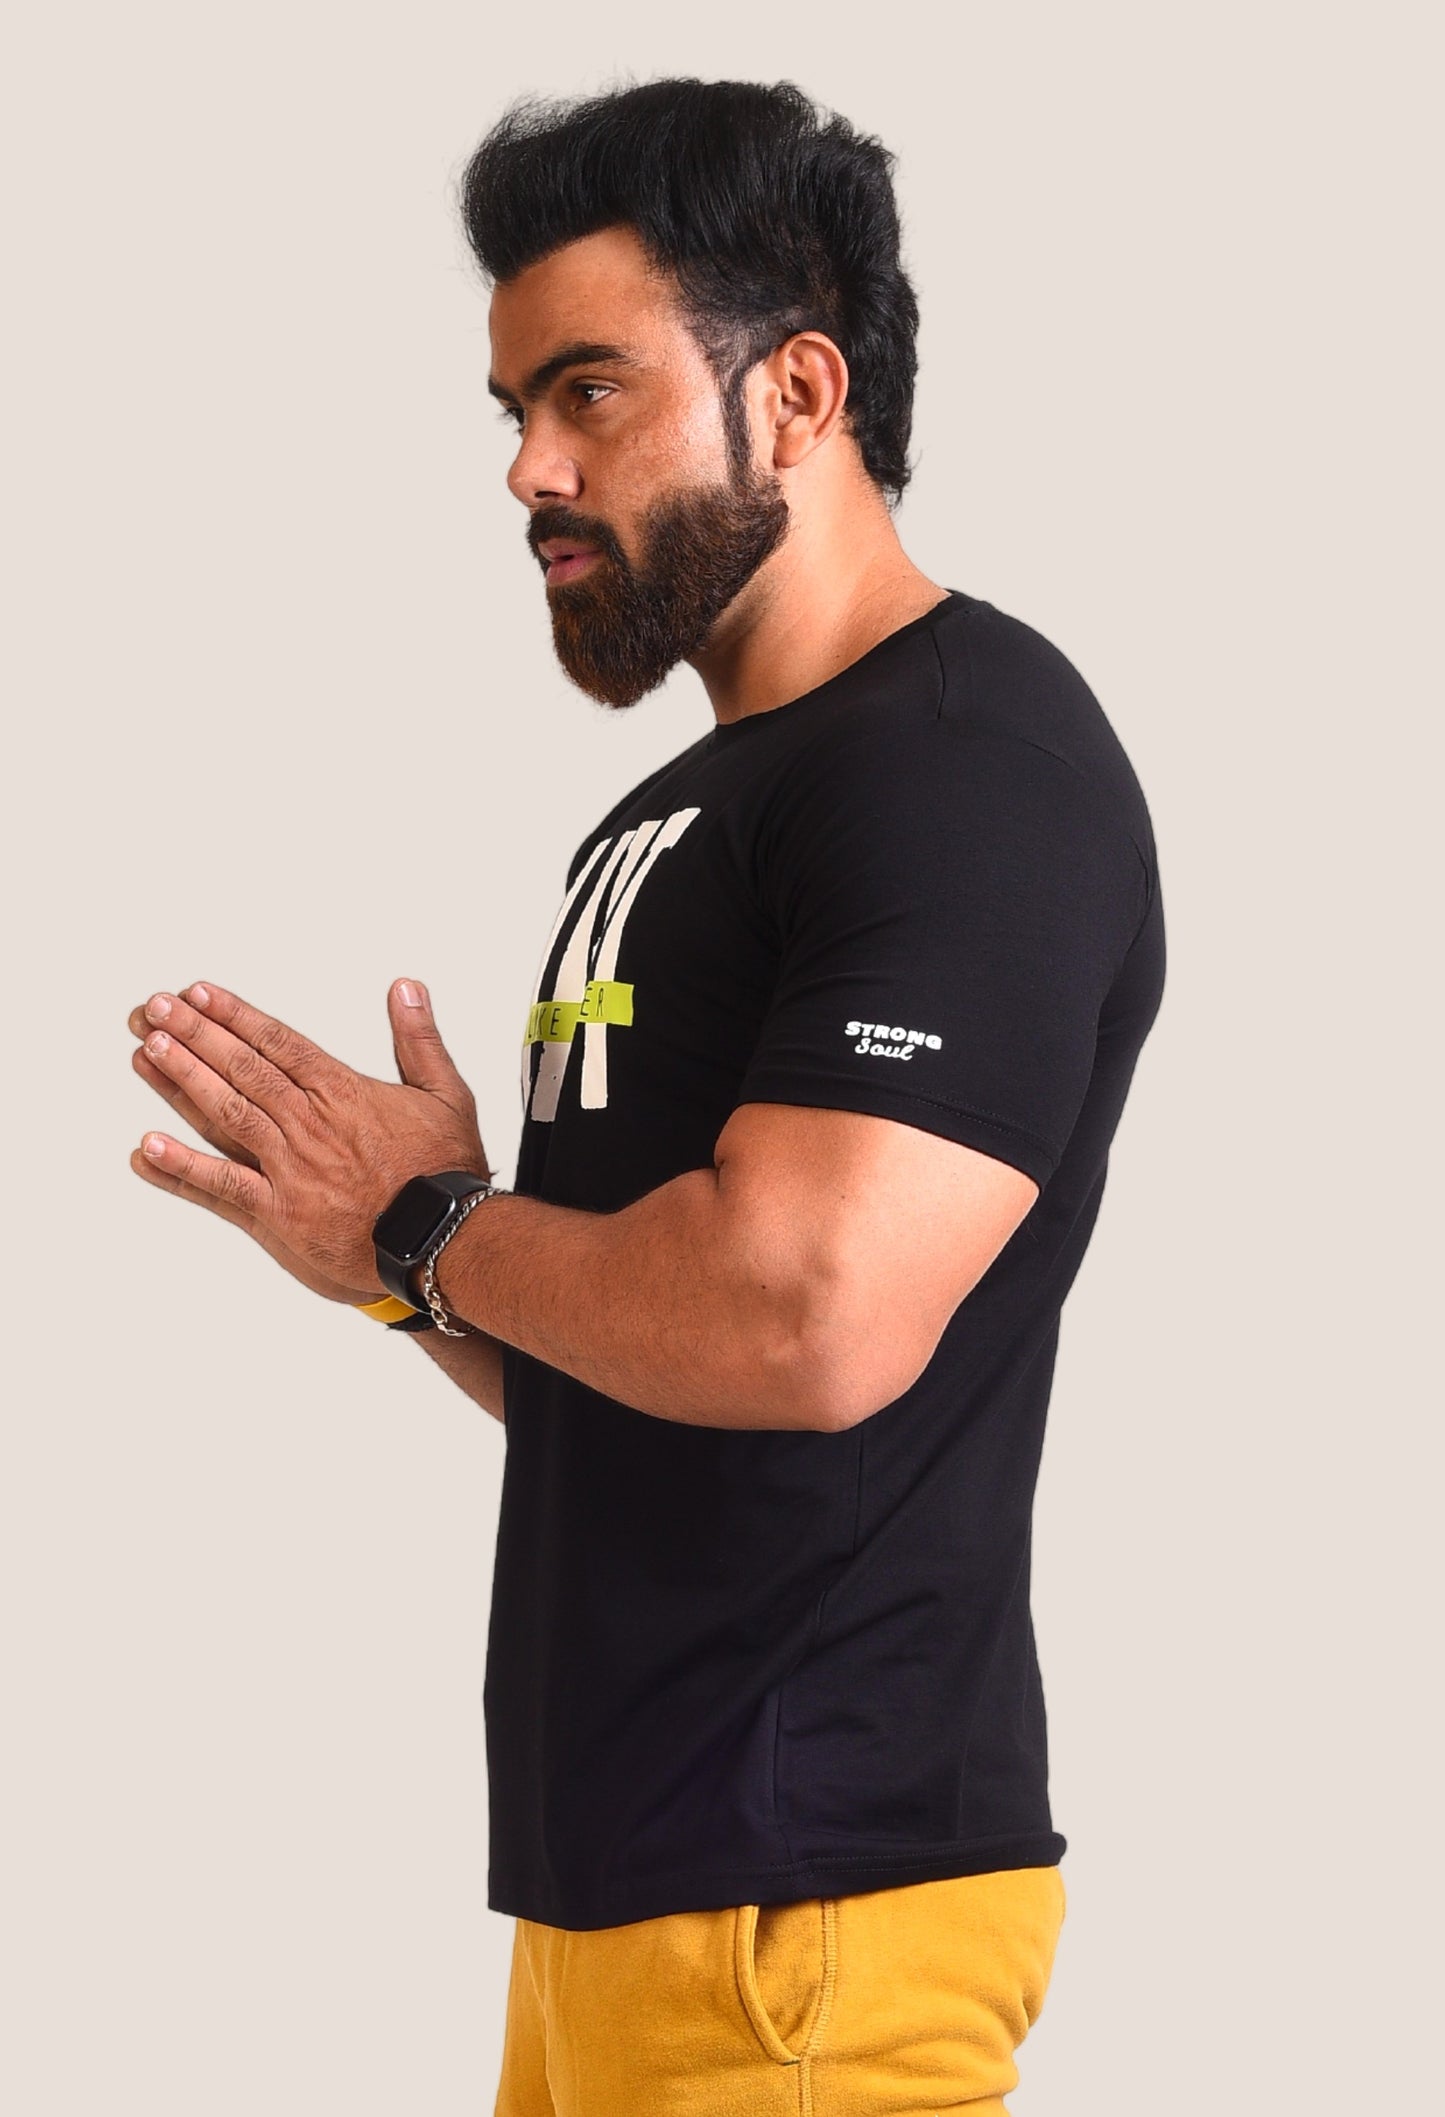 Gym T Shirt - Lift Like A Monster - Men T-Shirt with premium cotton Lycra. The Sports T Shirt by Strong Soul